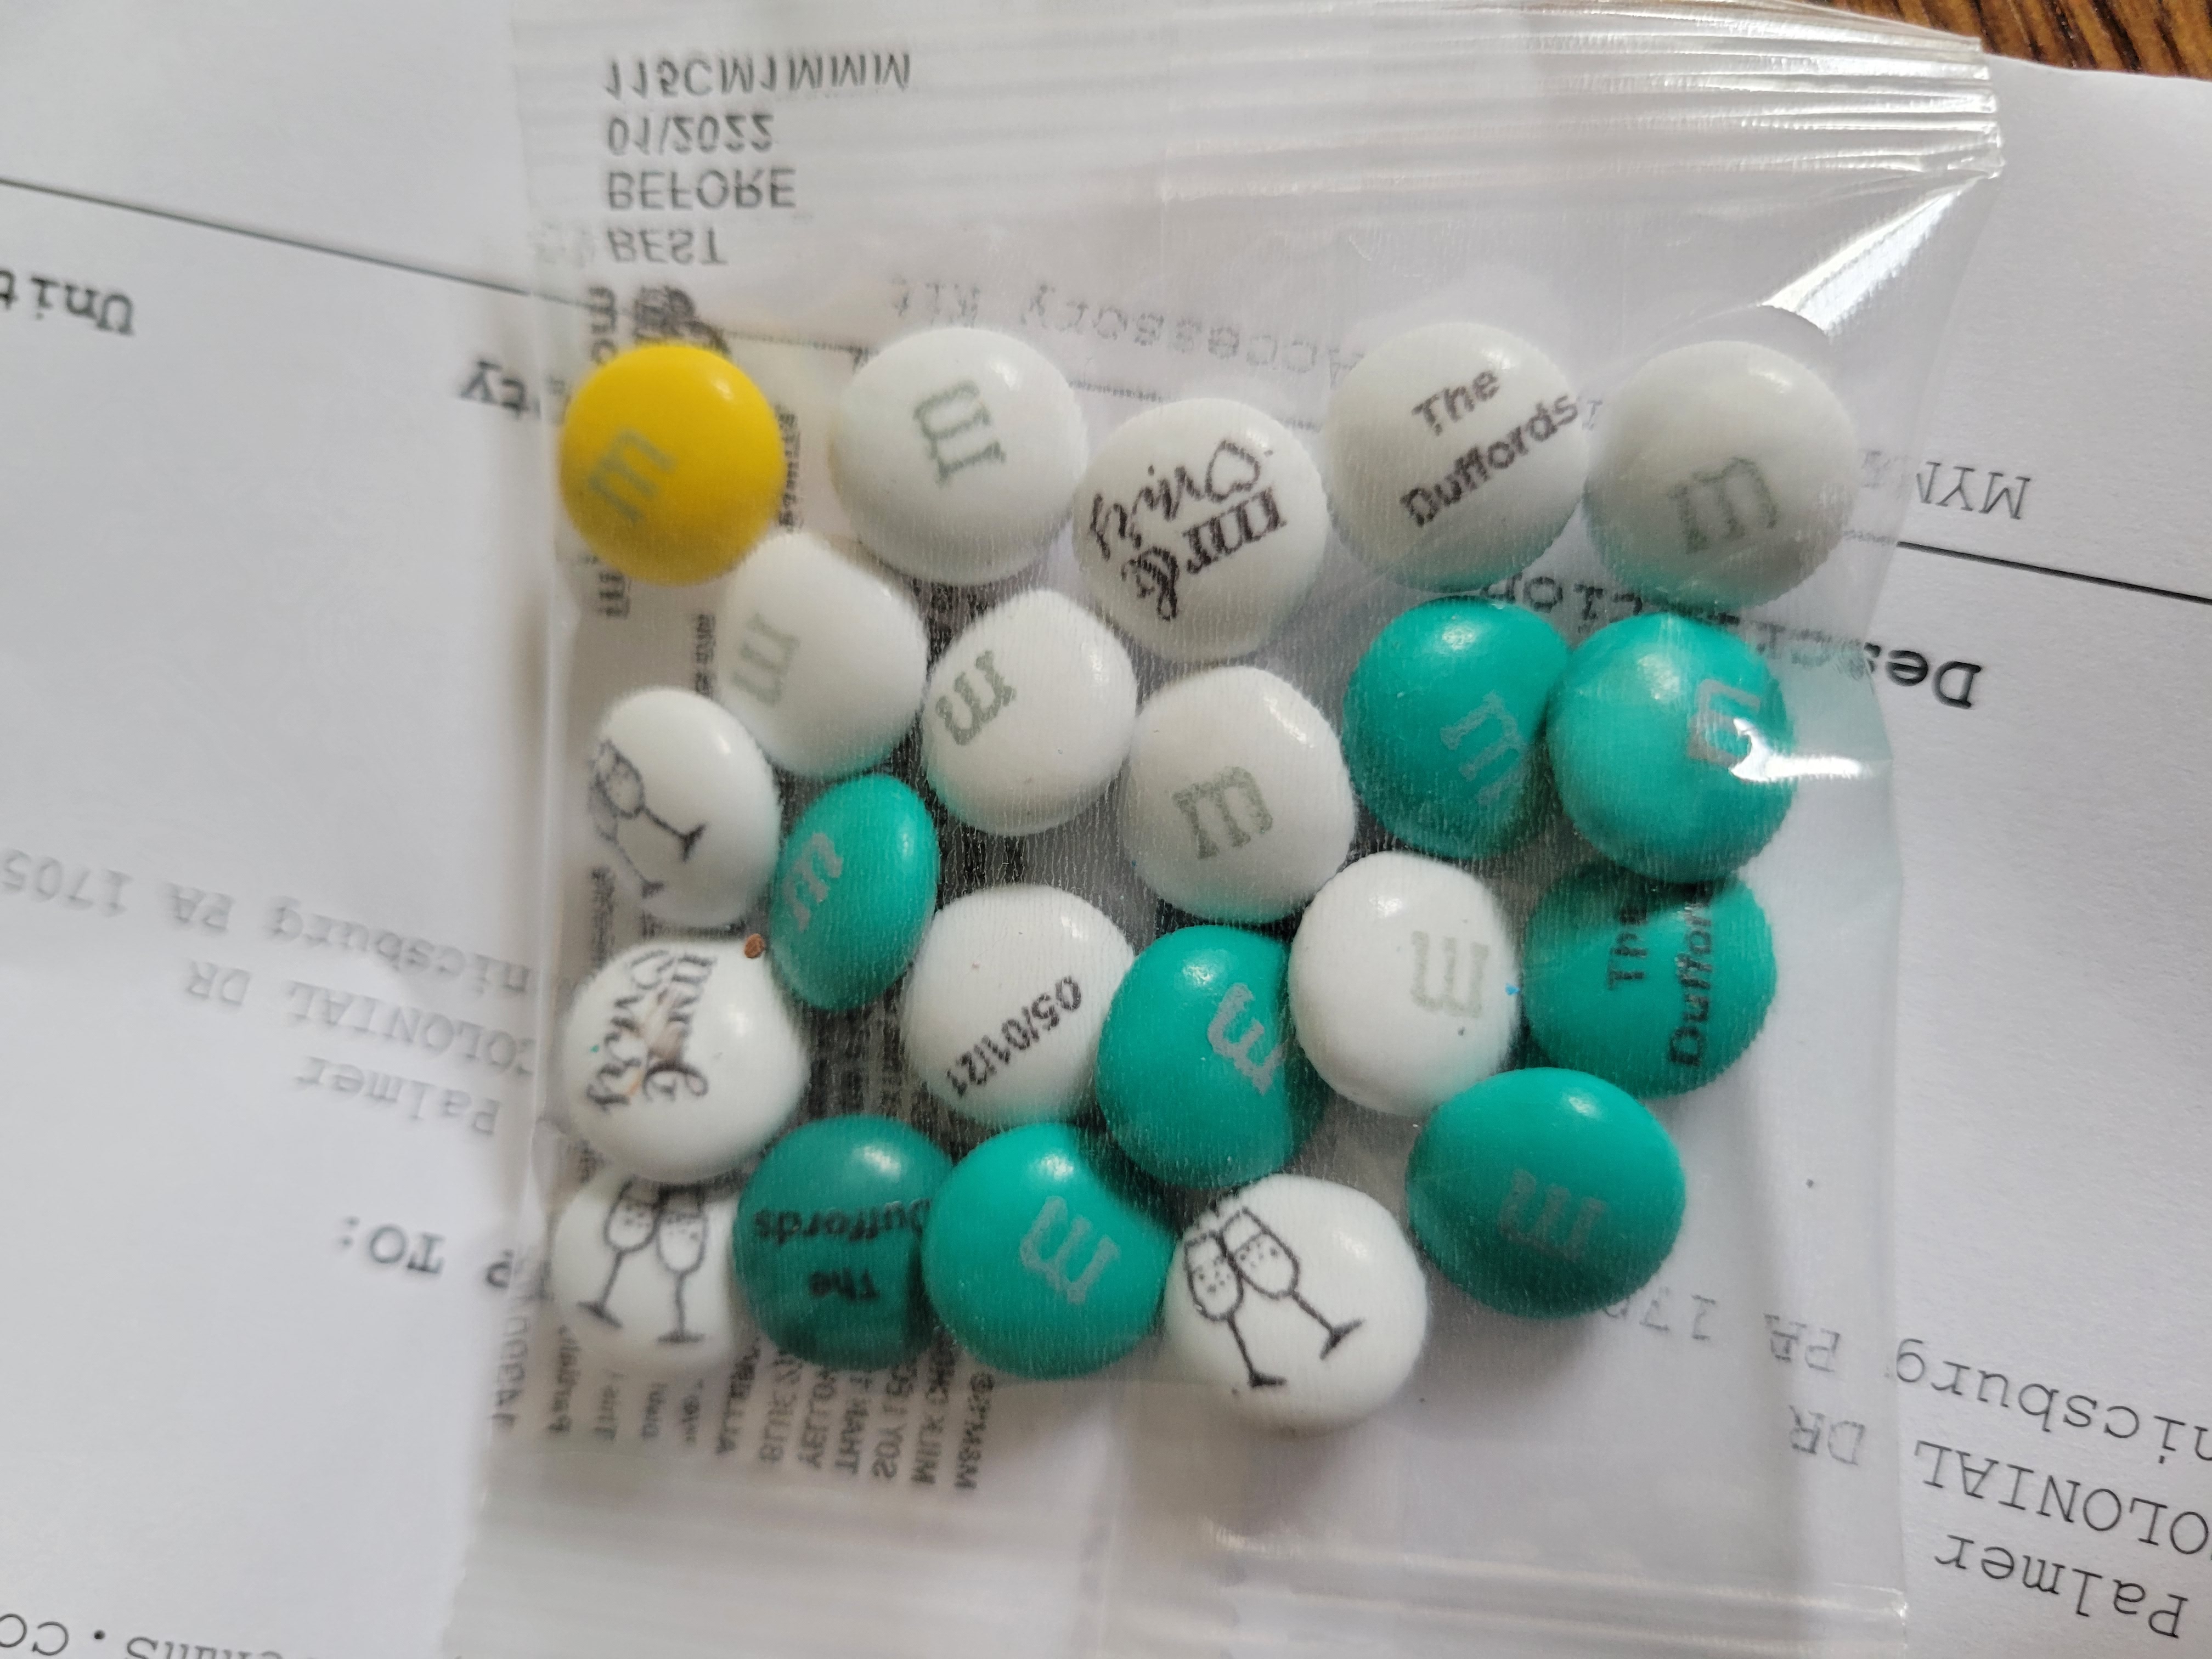 Personalized M&M'S from Mymms.com